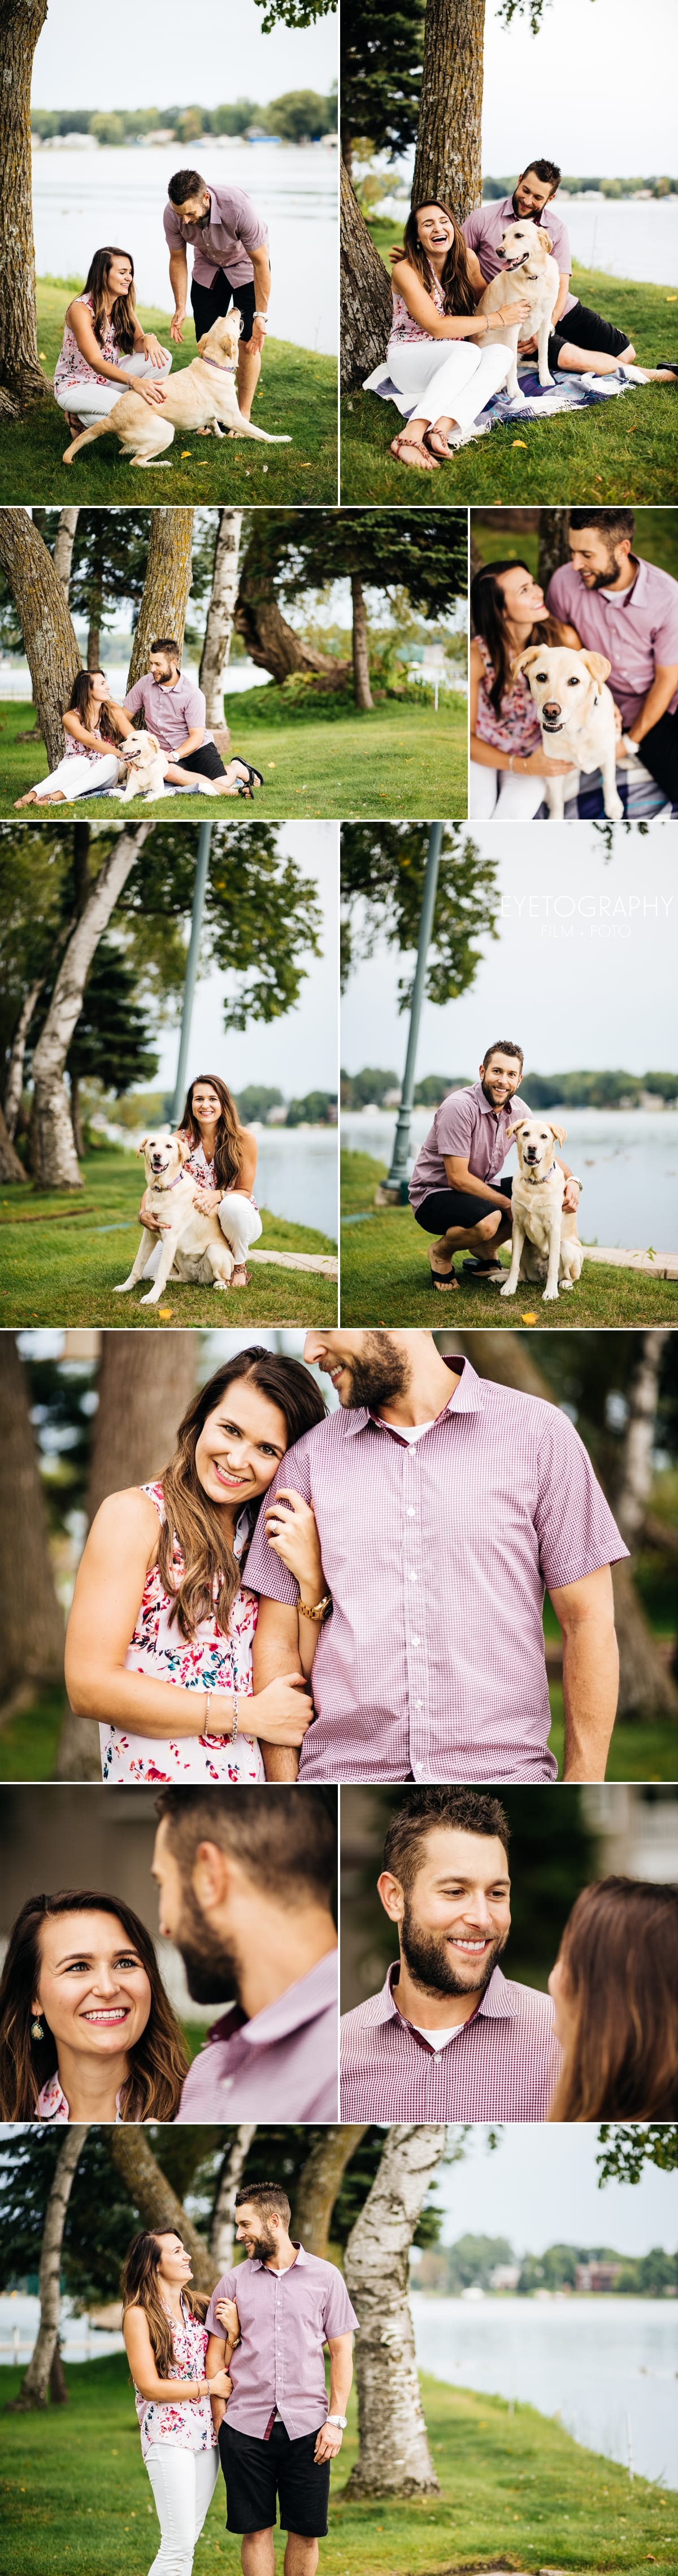 Engagement Session on a Lake | Andrea + Chris | Eyetography Film + Foto Minneapolis, MN